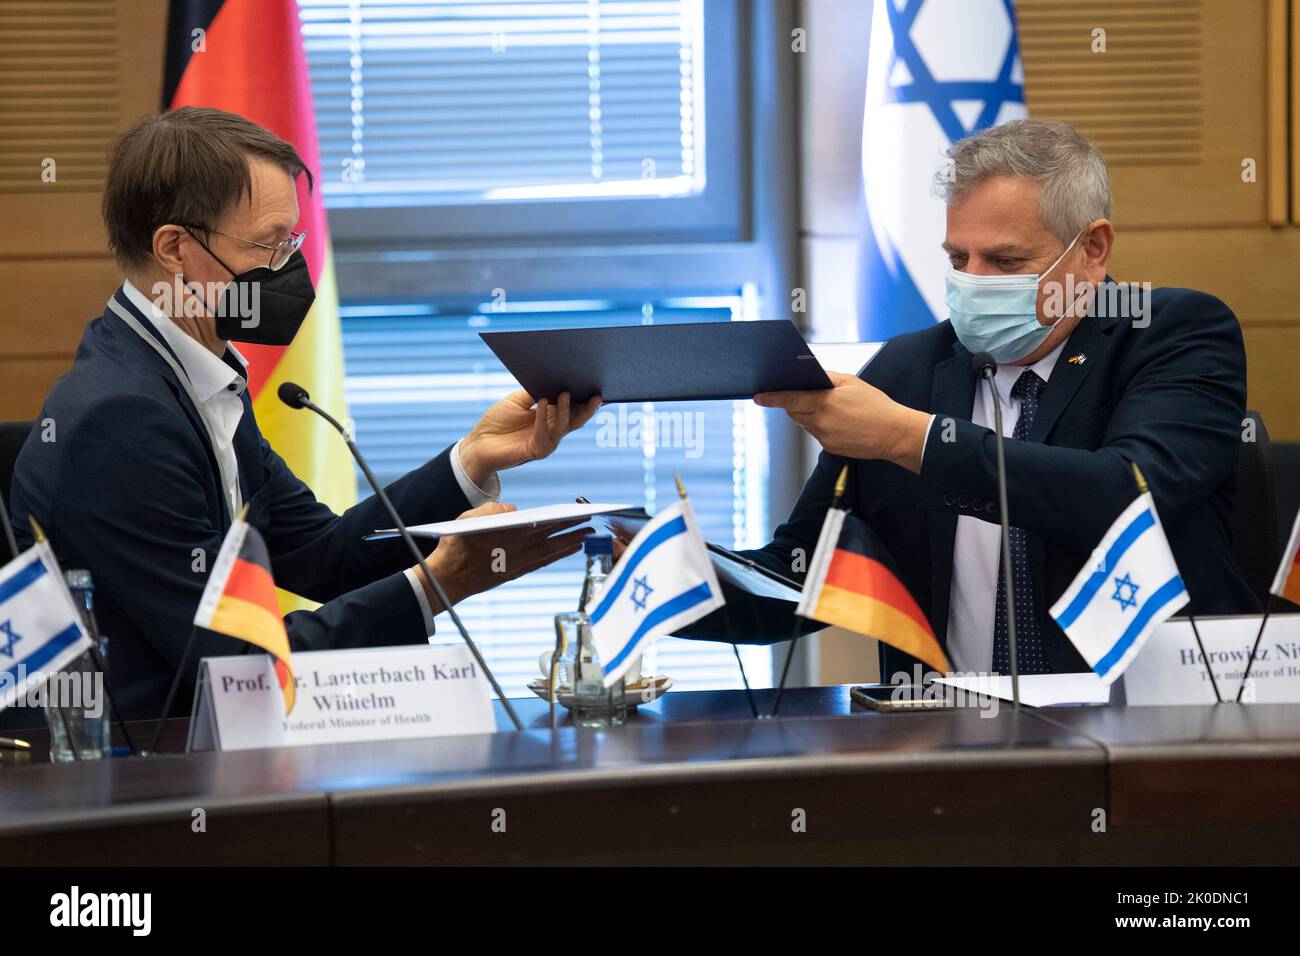 Jerusalem, Israel. 11th Sep, 2022. Karl Lauterbach (SPD, l), Federal Minister of Health, and Nitzan Horowitz, Chairman of the Meretz party and Israeli Minister of Health, sign a joint declaration of intent for cooperation on health policy issues in the Knesset's 'Jerusalem Hall'. For the German minister, the focus in Israel is on German-Israeli friendship, joint pandemic control and Israel as a role model for the digitalization of healthcare. Credit: Christophe Gateau/dpa/Alamy Live News Stock Photo